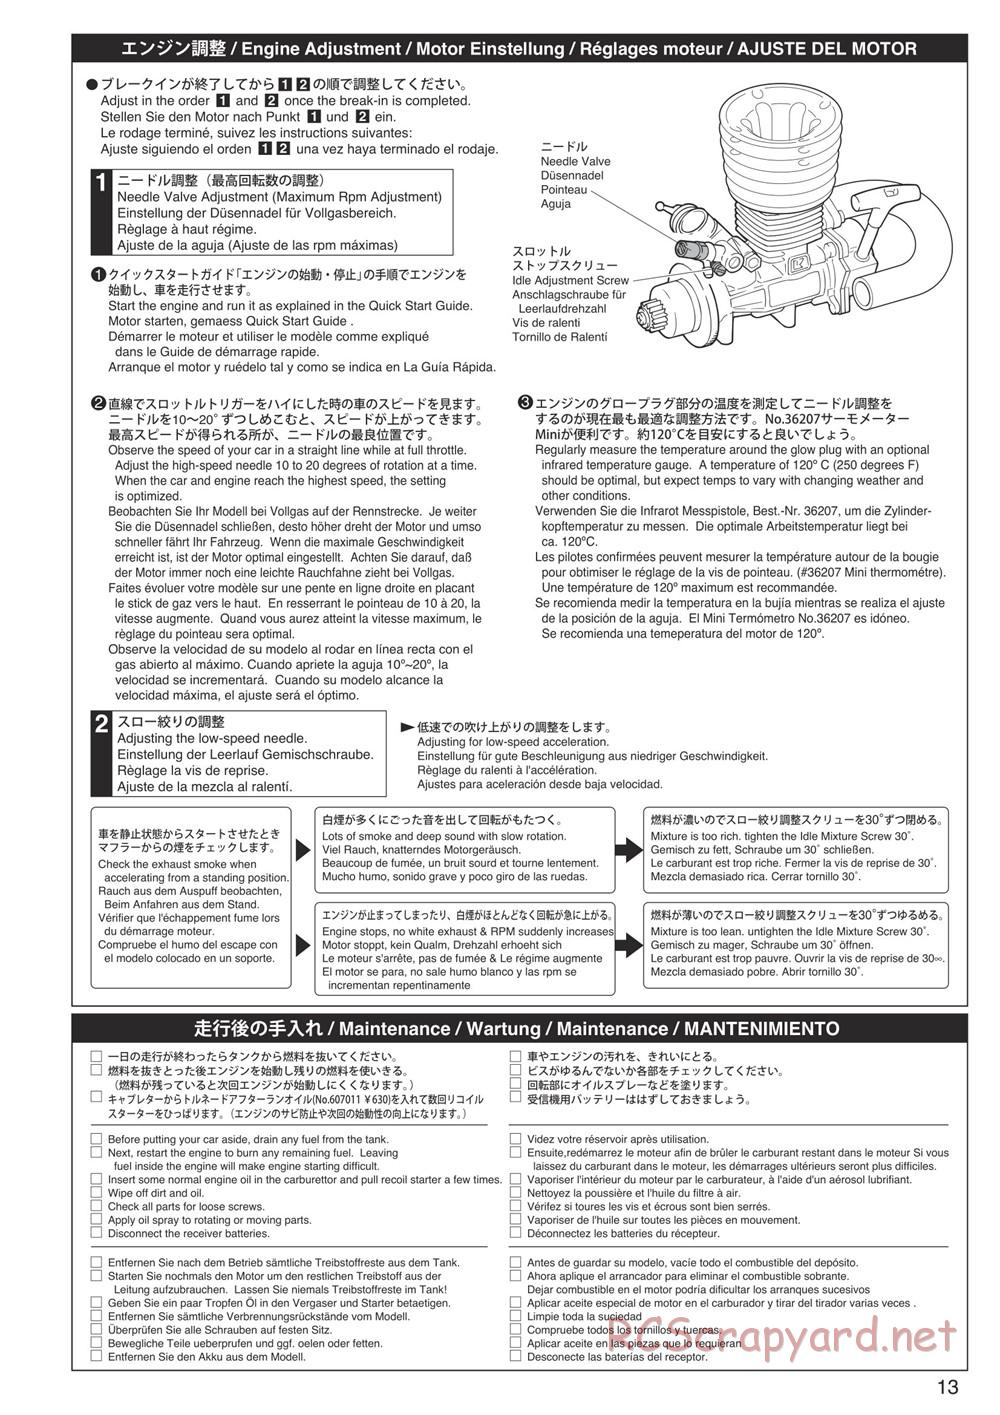 Kyosho - Inferno Neo - Manual - Page 13